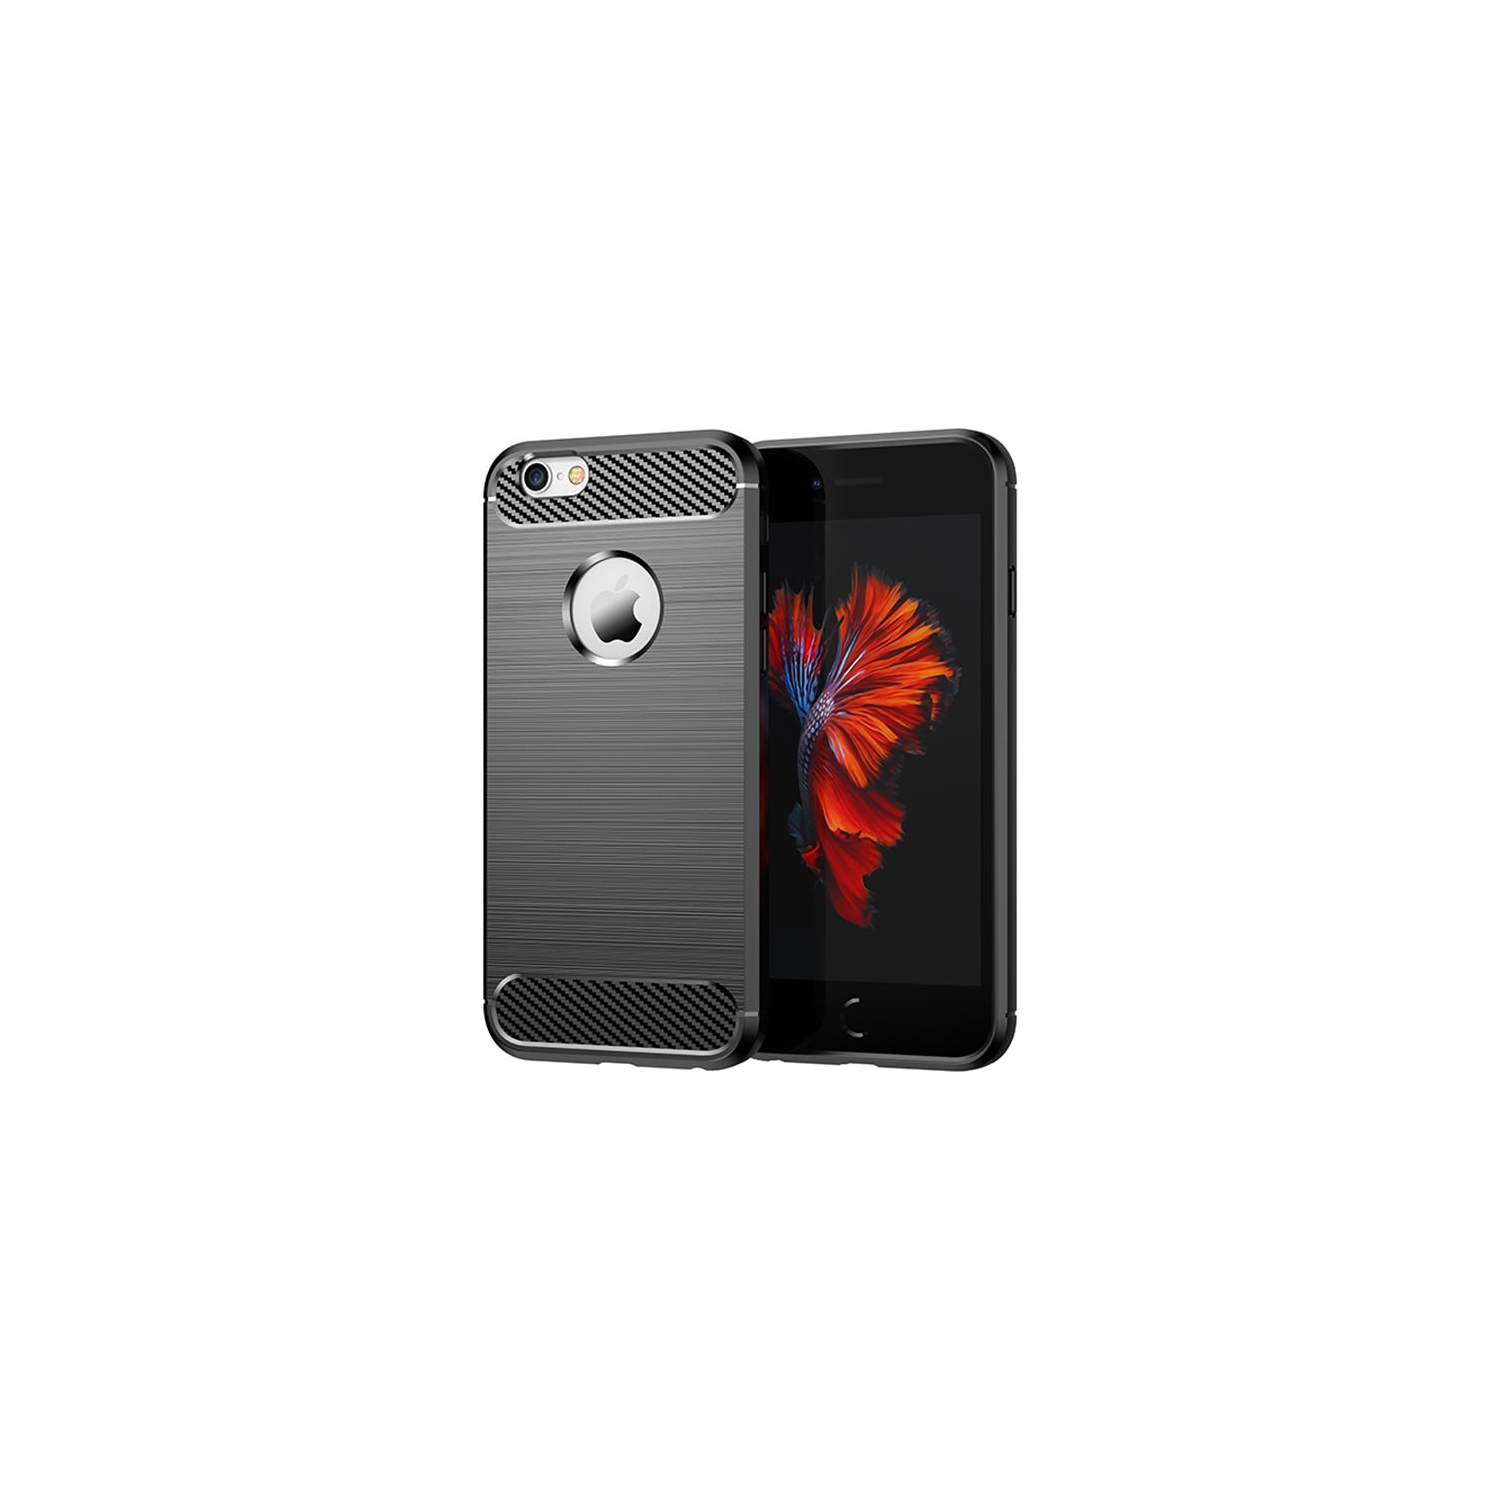 PANDACO Black Brushed Metal Case for iPhone 6 or iPhone 6S